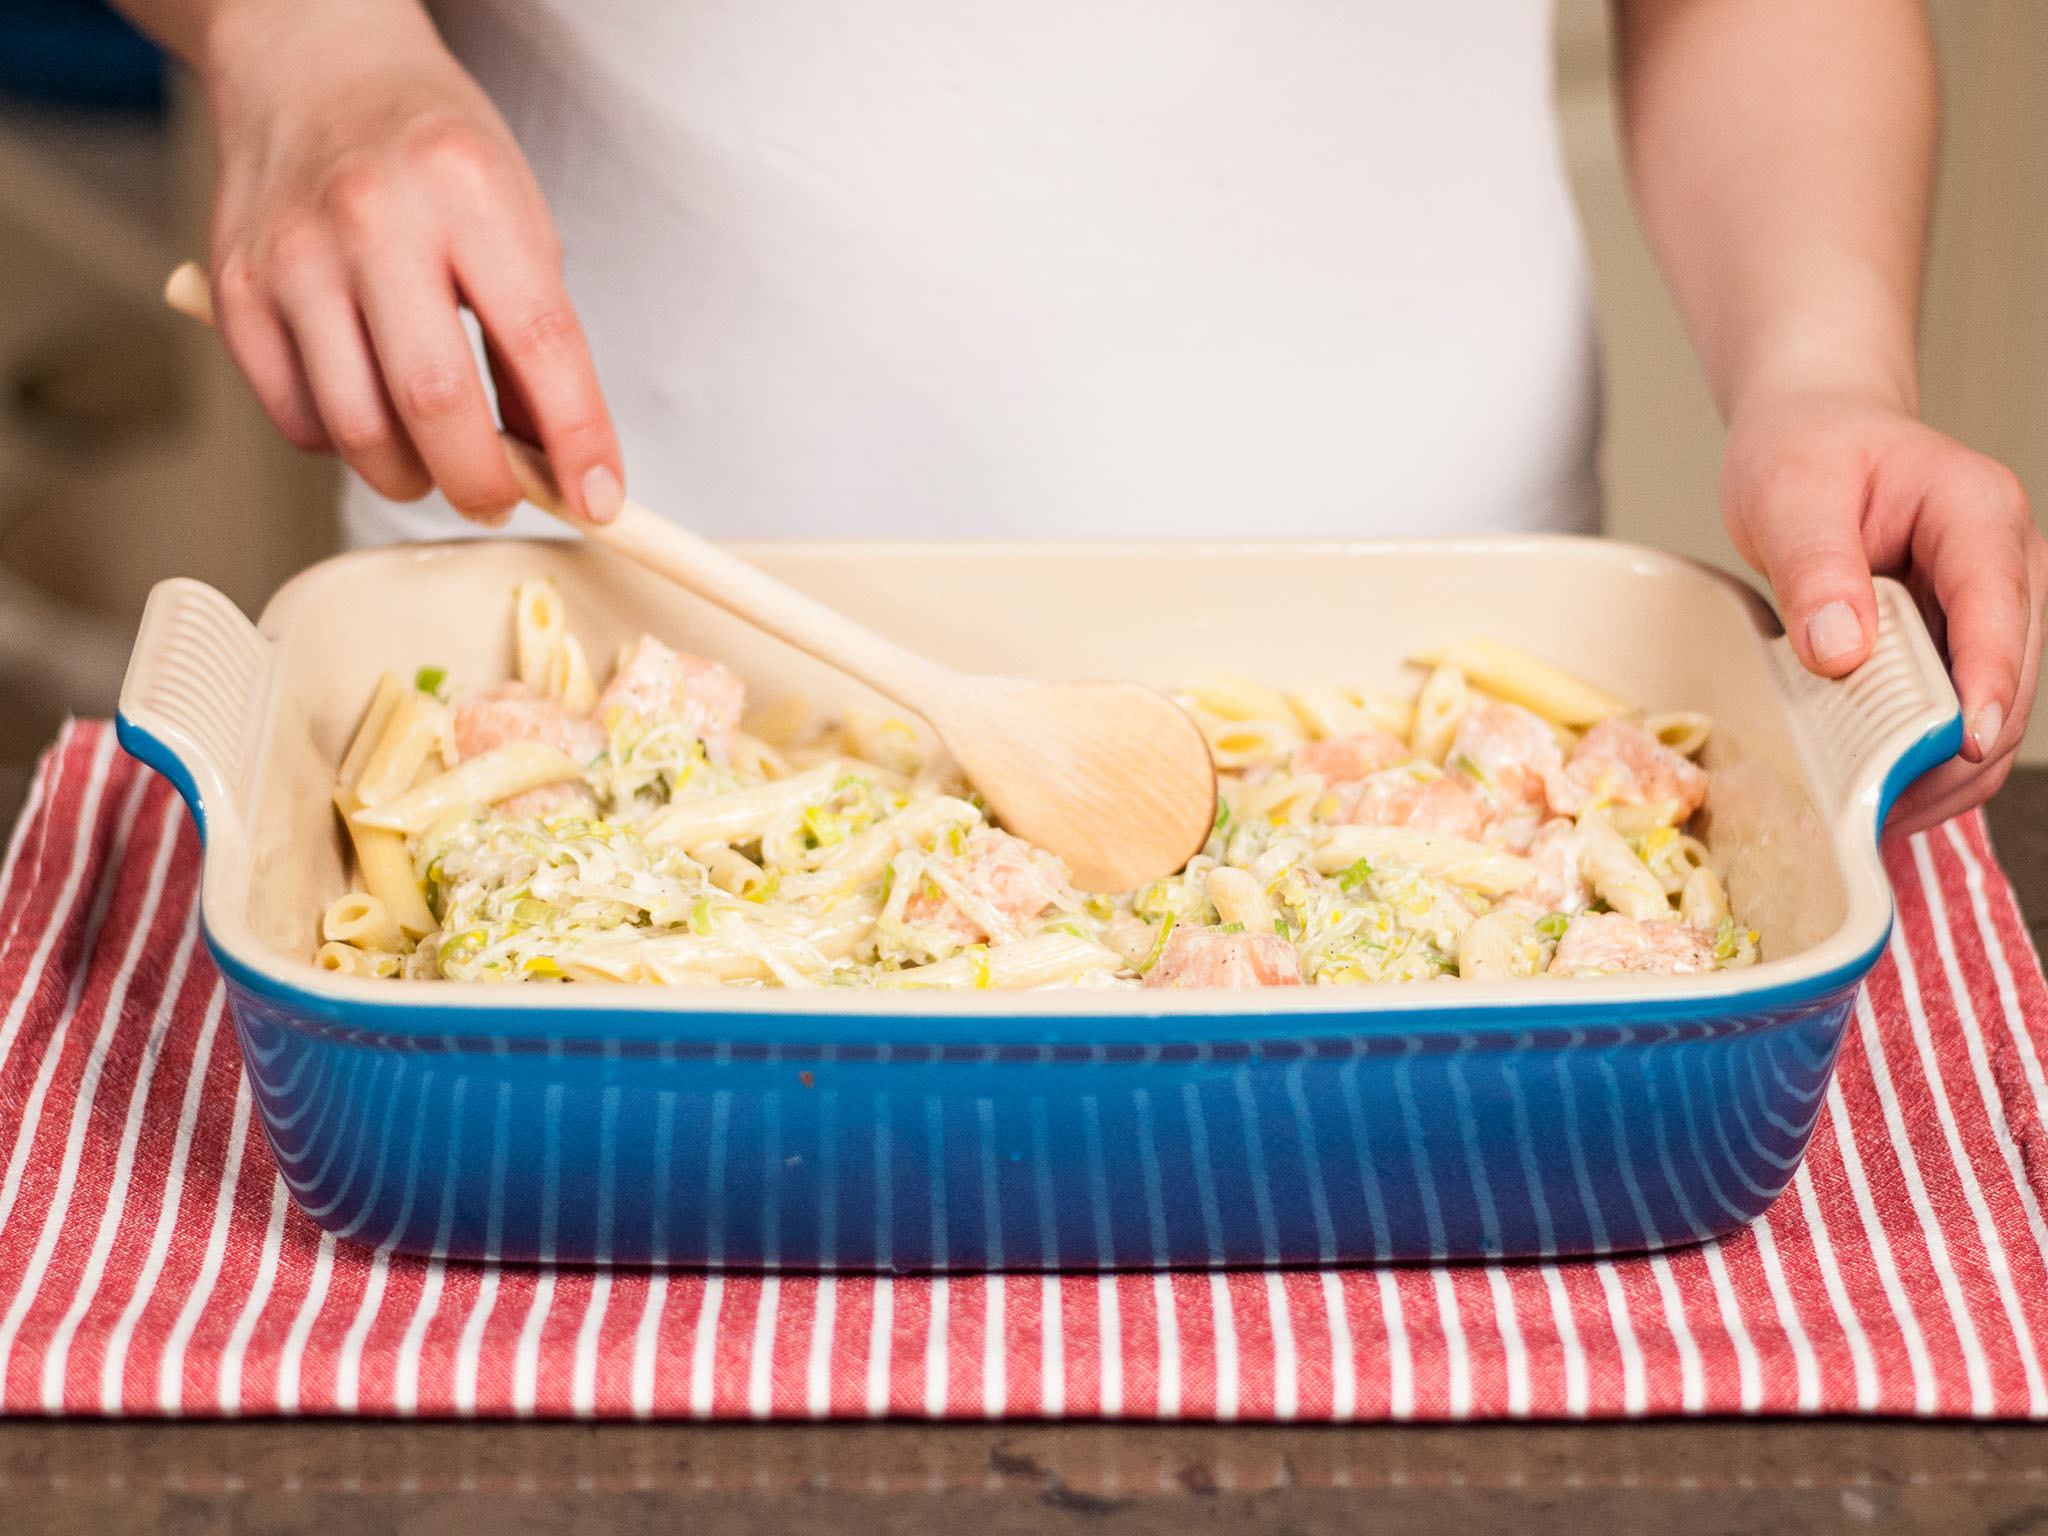 Baked penne with salmon and leeks